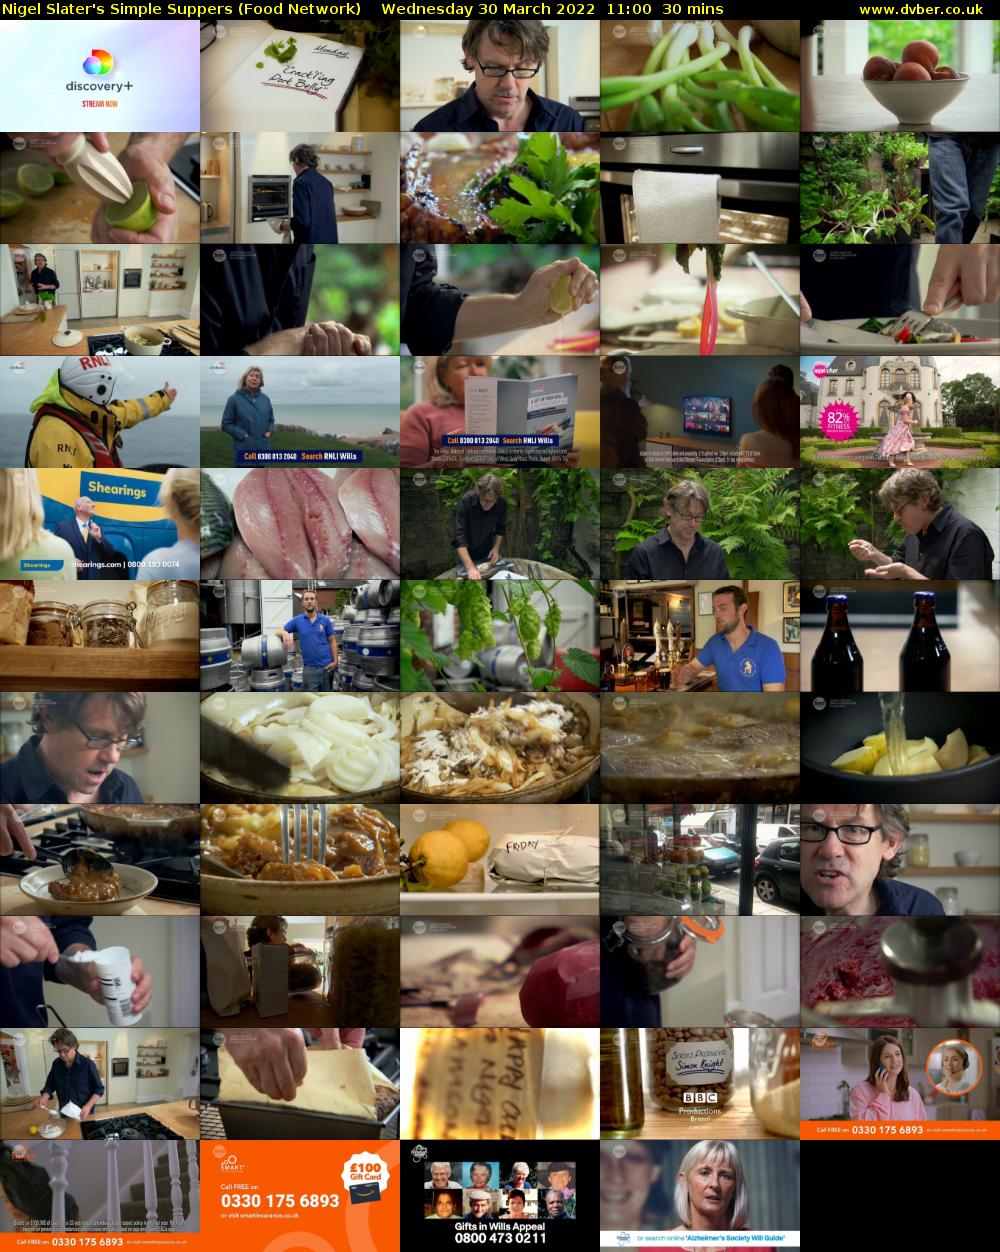 Nigel Slater's Simple Suppers (Food Network) Wednesday 30 March 2022 11:00 - 11:30